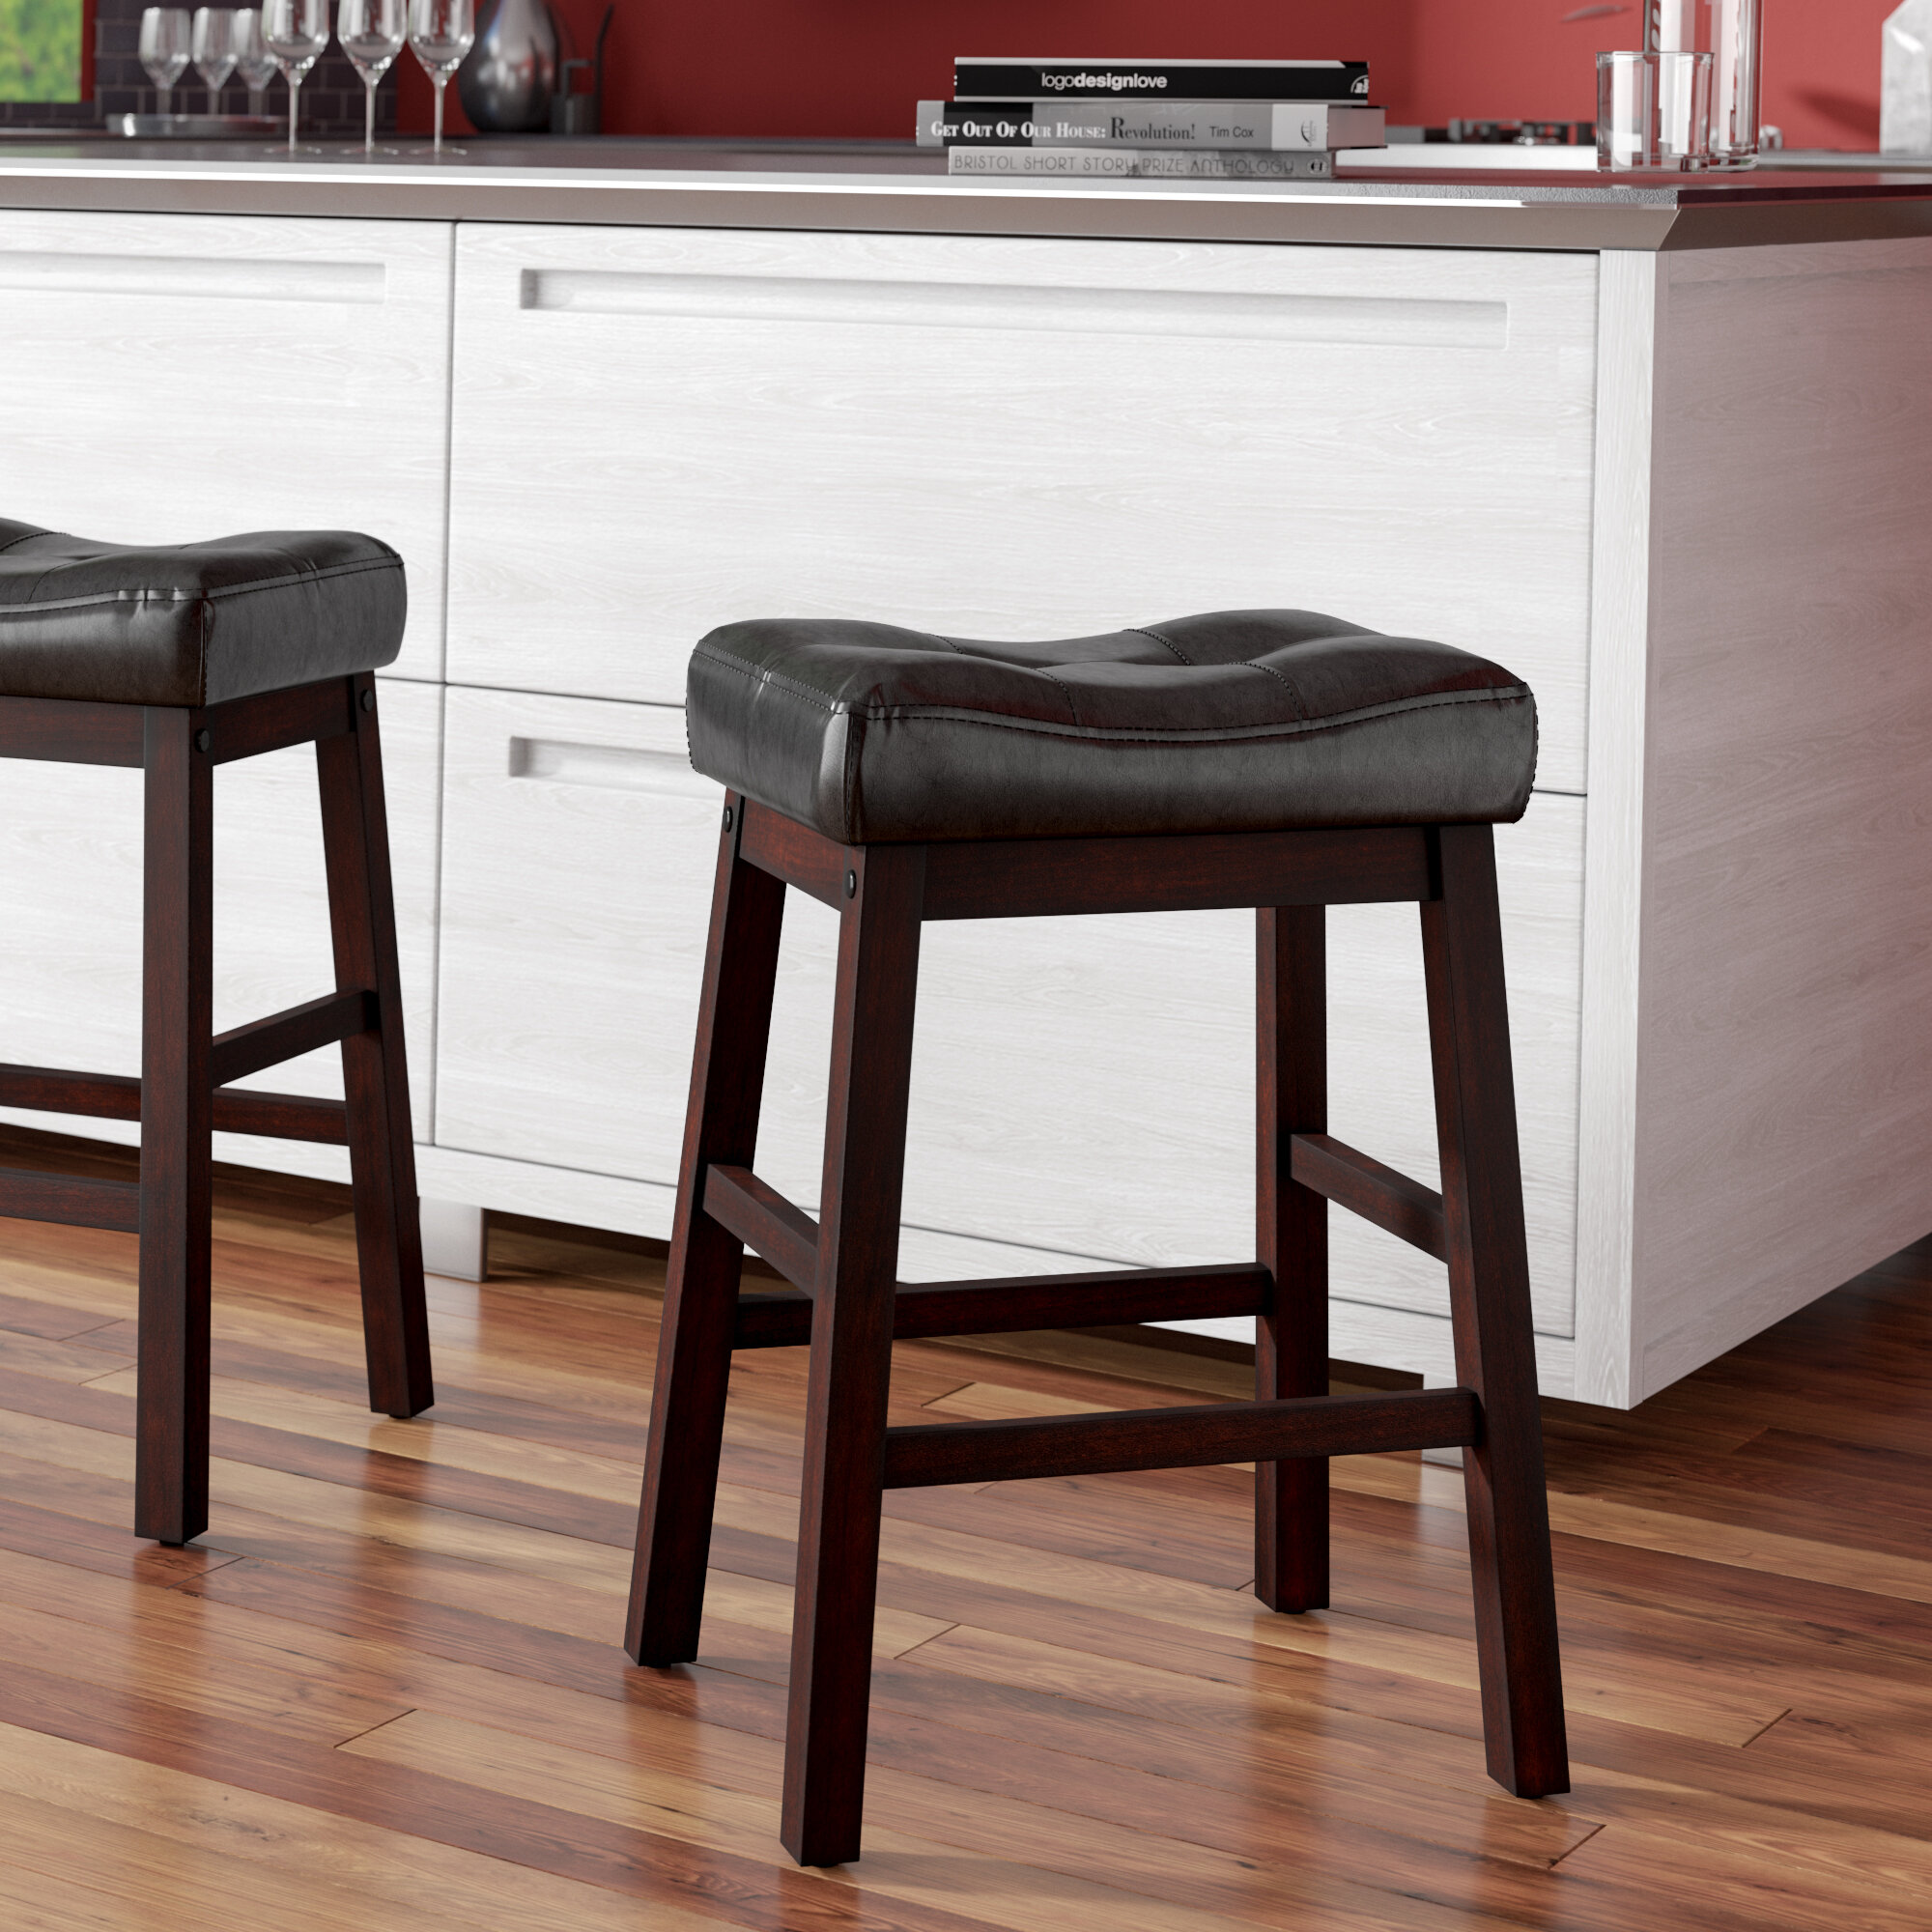 Saddle Seat Stool 24 In Counter Bar Stools Backless Wood Chair Set Of 2